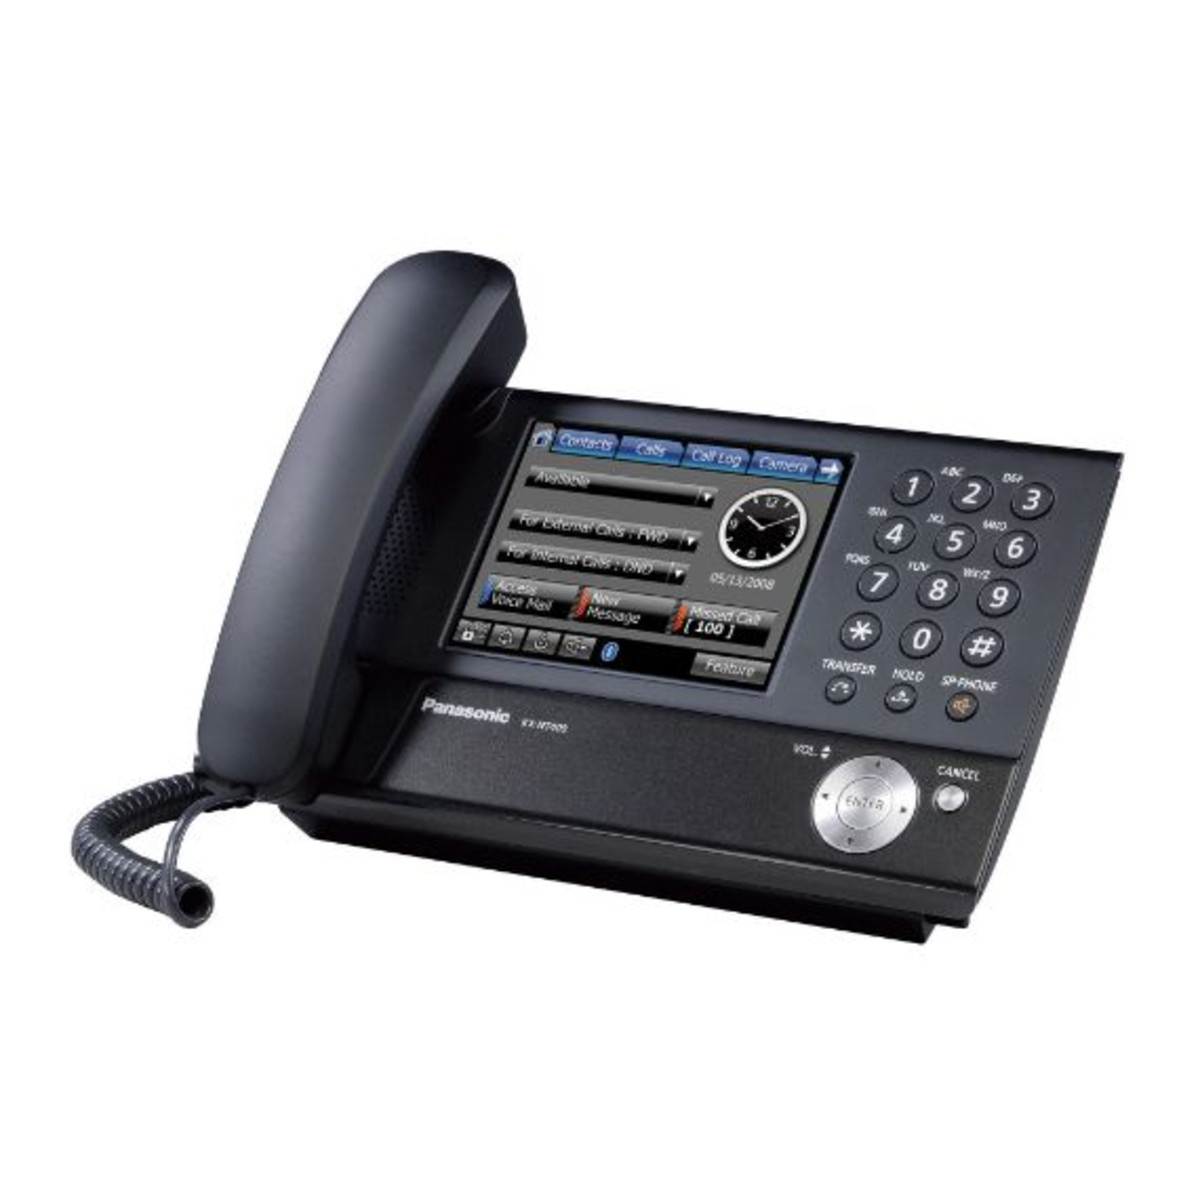 Panasonic Large Color Touch-Screen IP Phone (p/n- KXNT400)